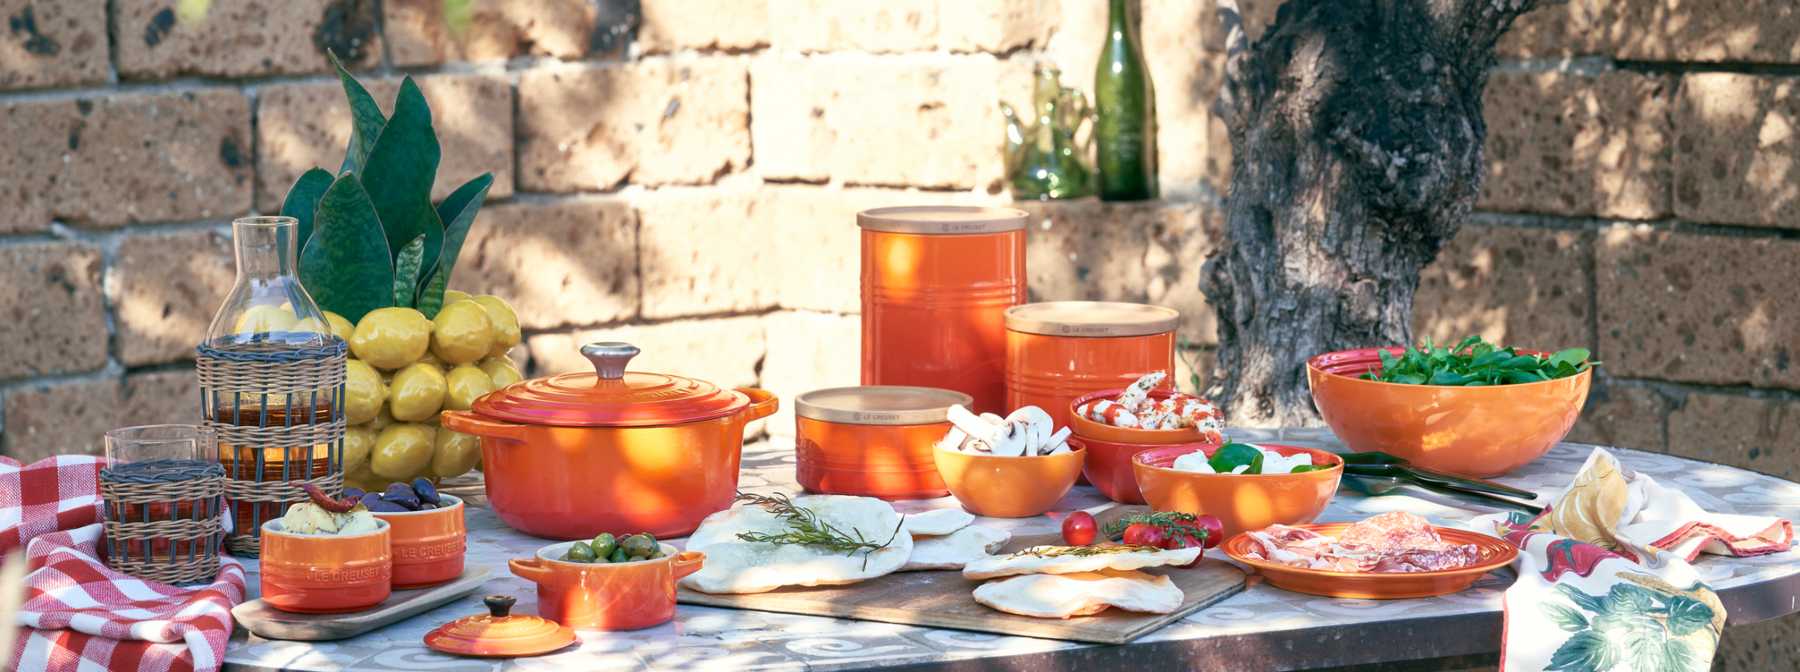 New Recipes from Le Creuset to Help You Embrace The Great Outdoors